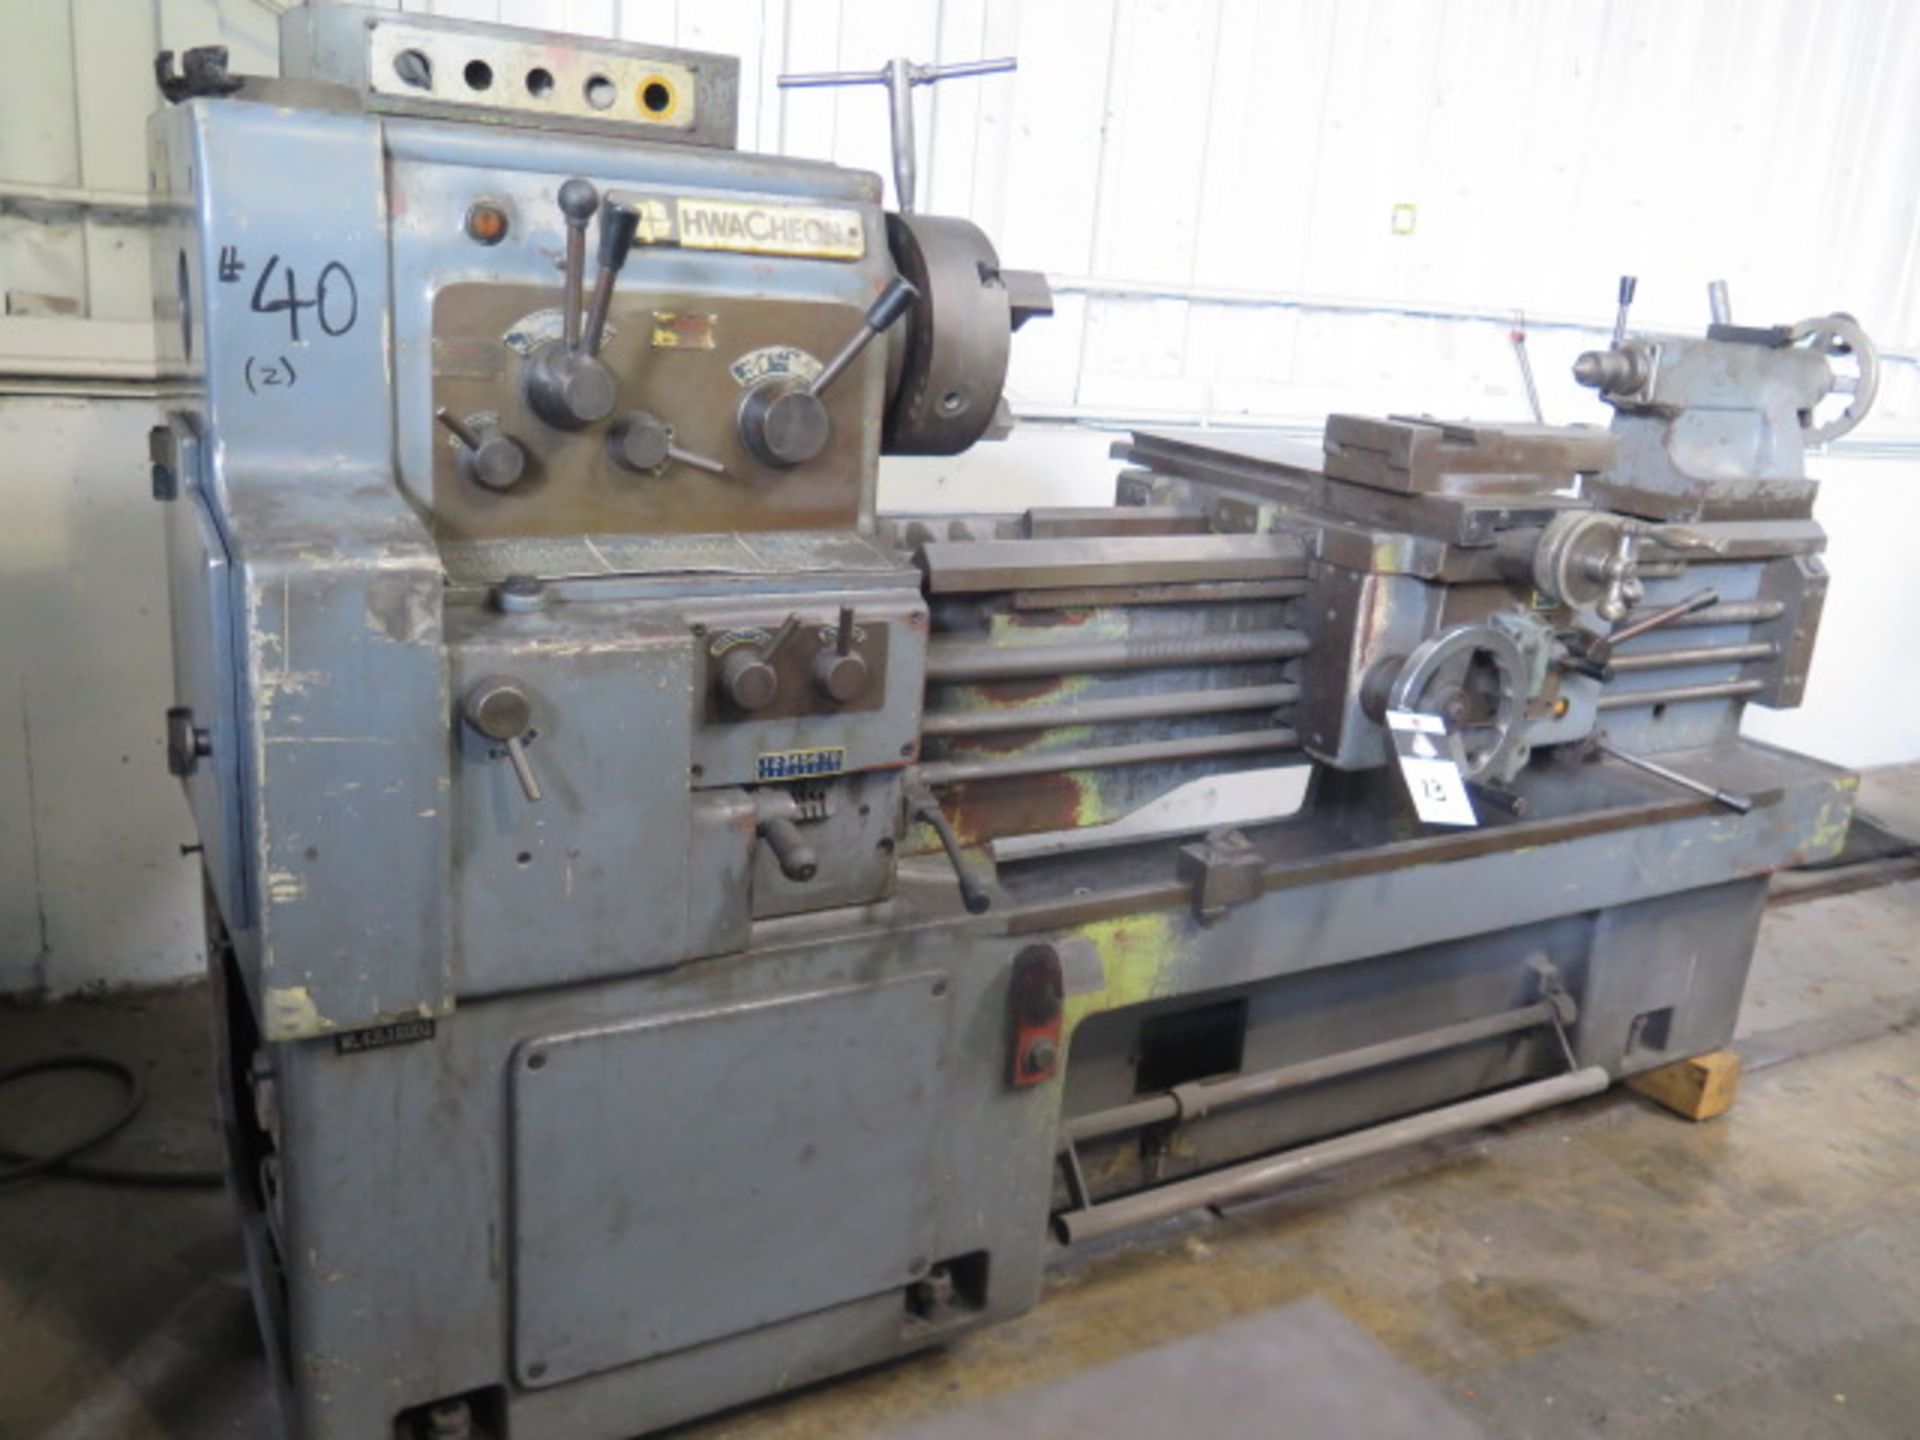 Hwa Cheon 17”GX40 17” x 40” Geared Head Gap Bed Lathe w/ 32-1800 RPM, Inch Threading, SOLD AS IS - Image 2 of 16